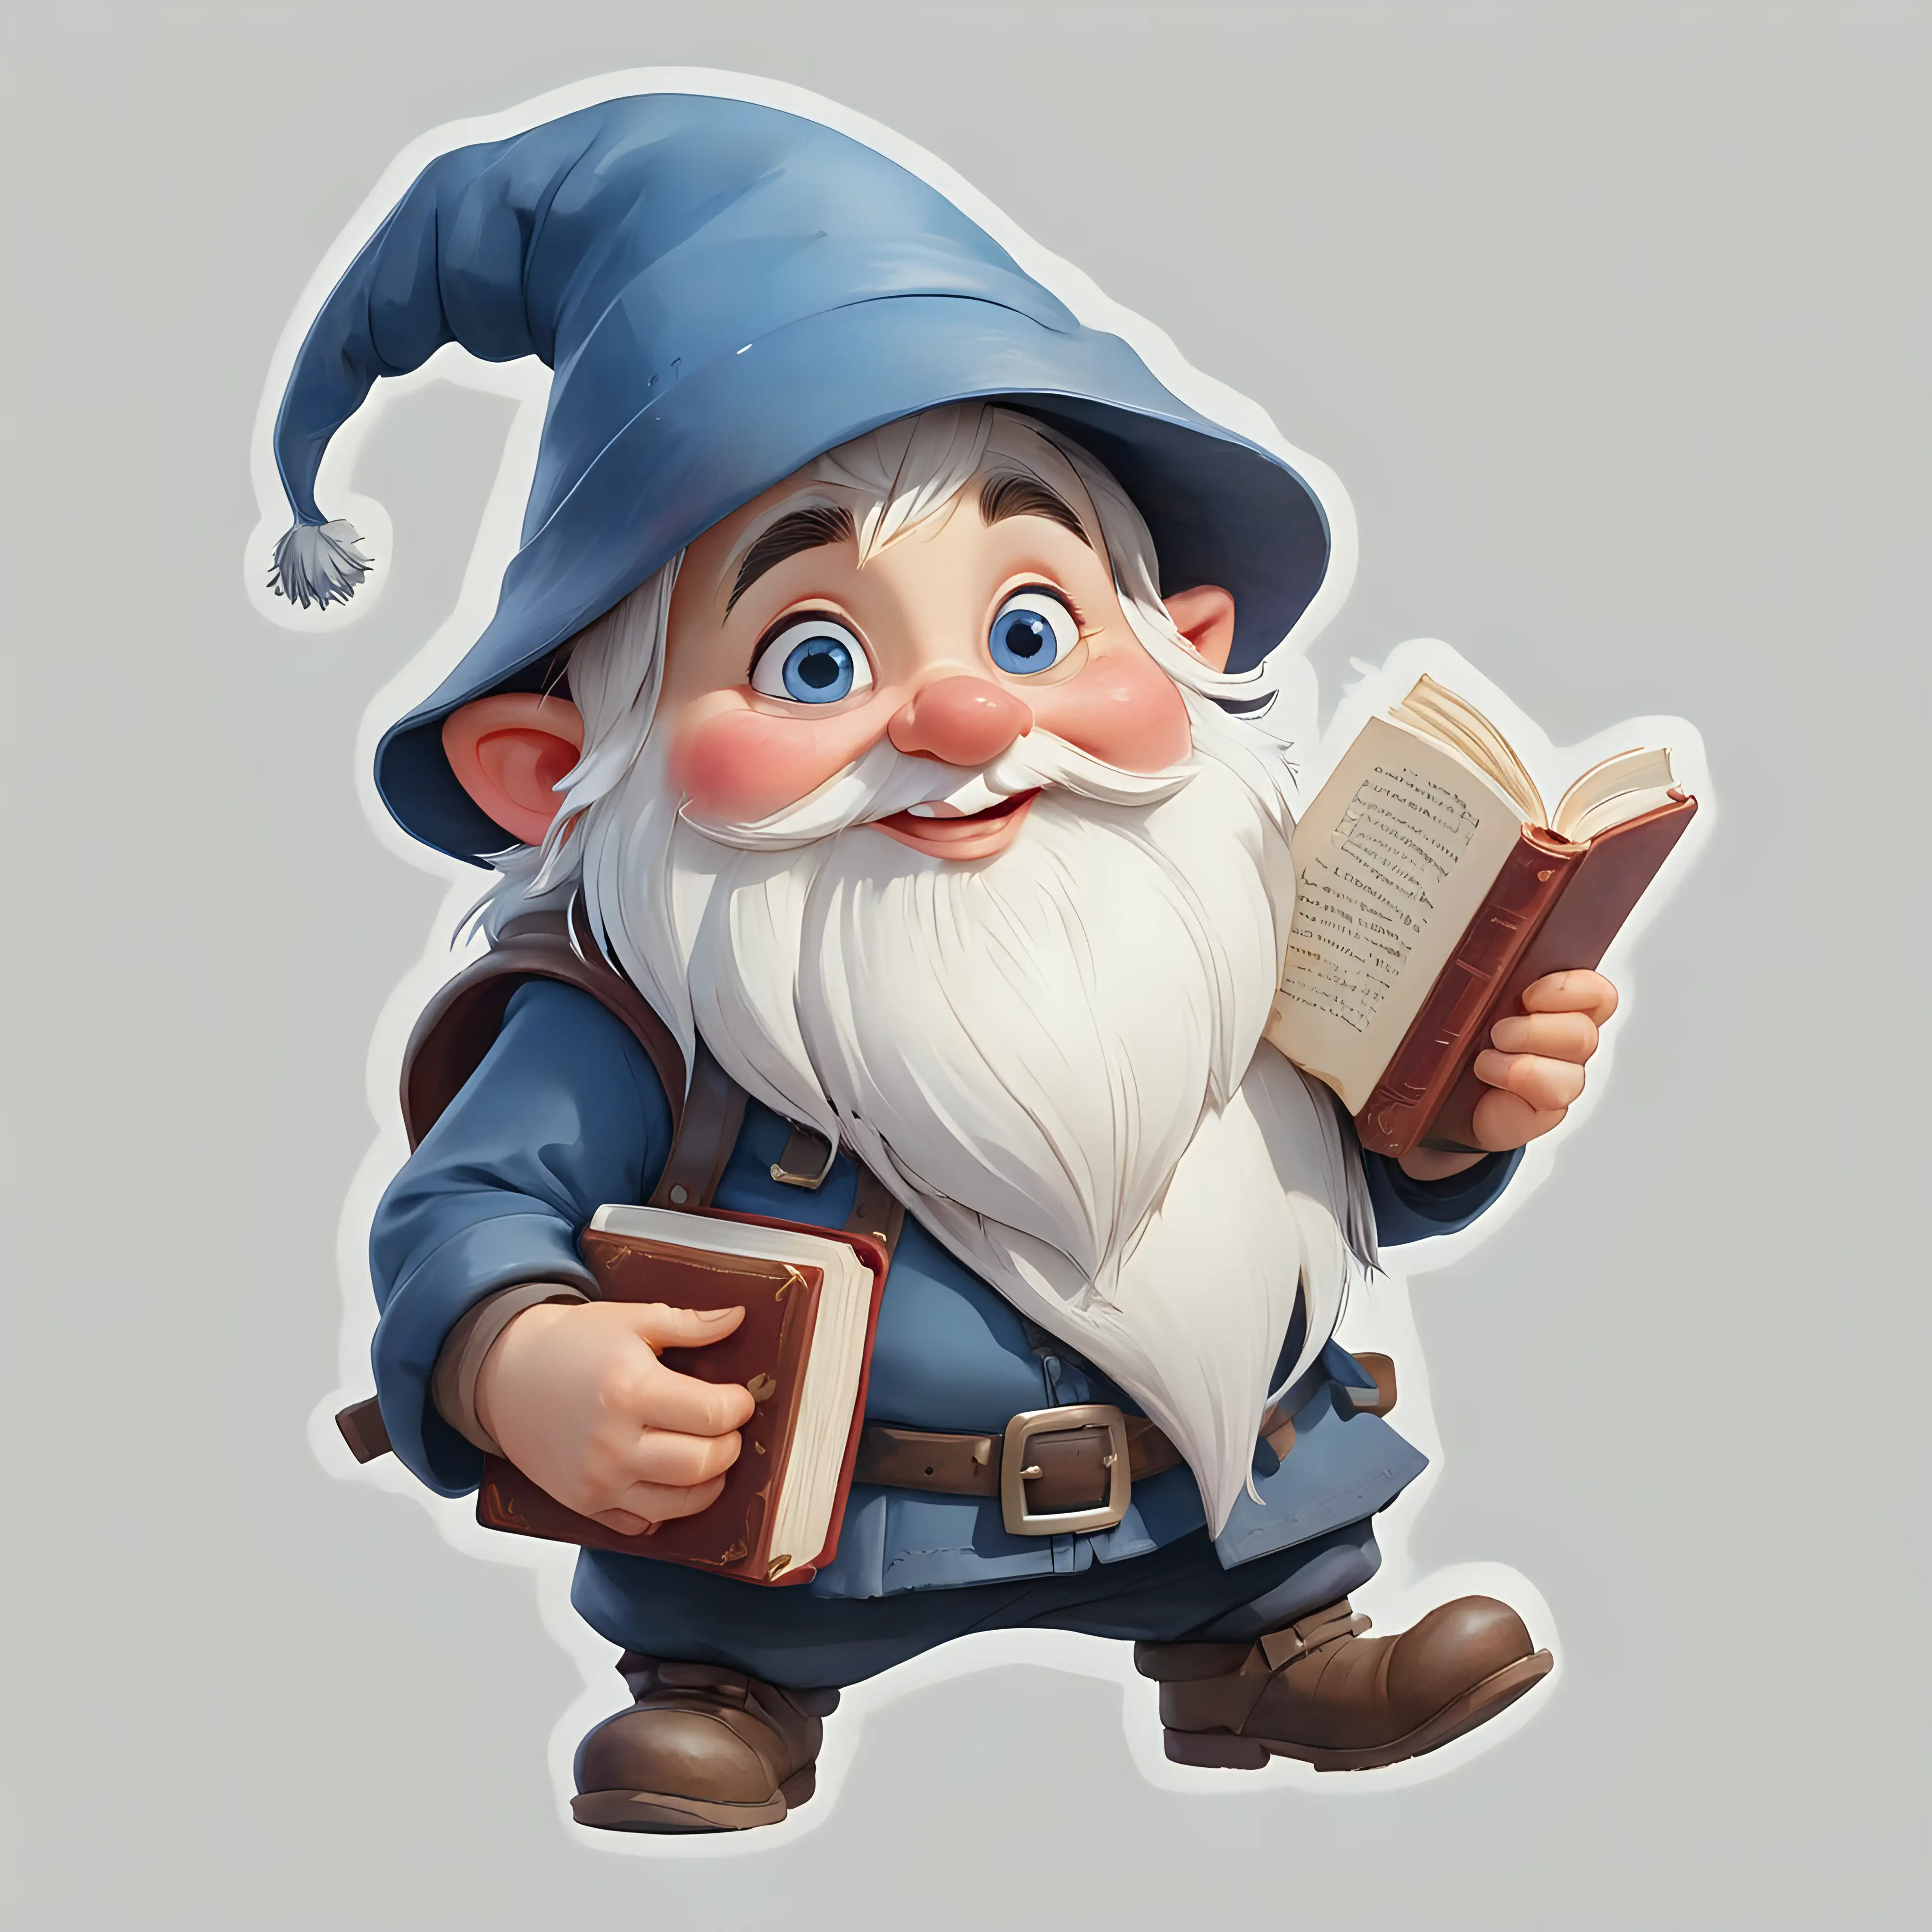 Cute Gnome Character Holding Blue Hat and Book